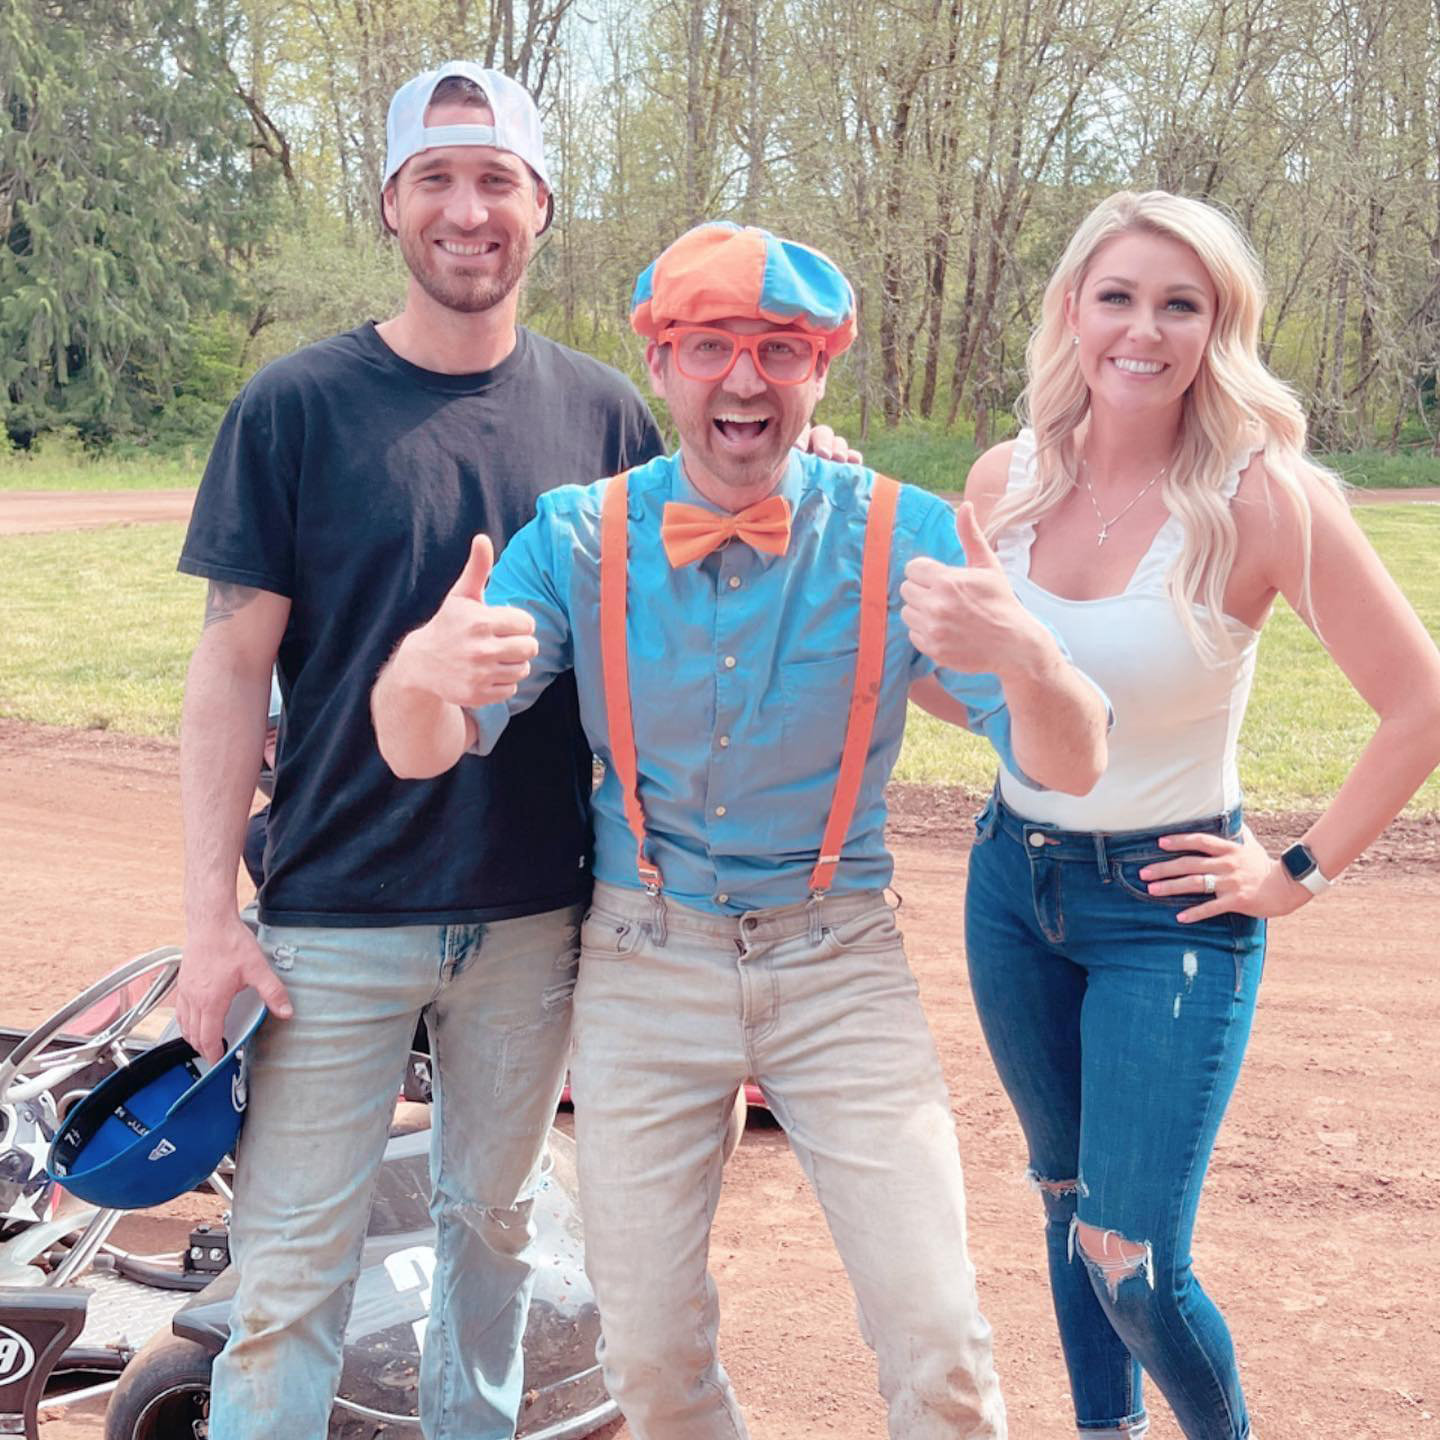 Ross Johnson, Blippi and Jade Johnson pose for a photo during the entertainer's visit to Tenino last week.